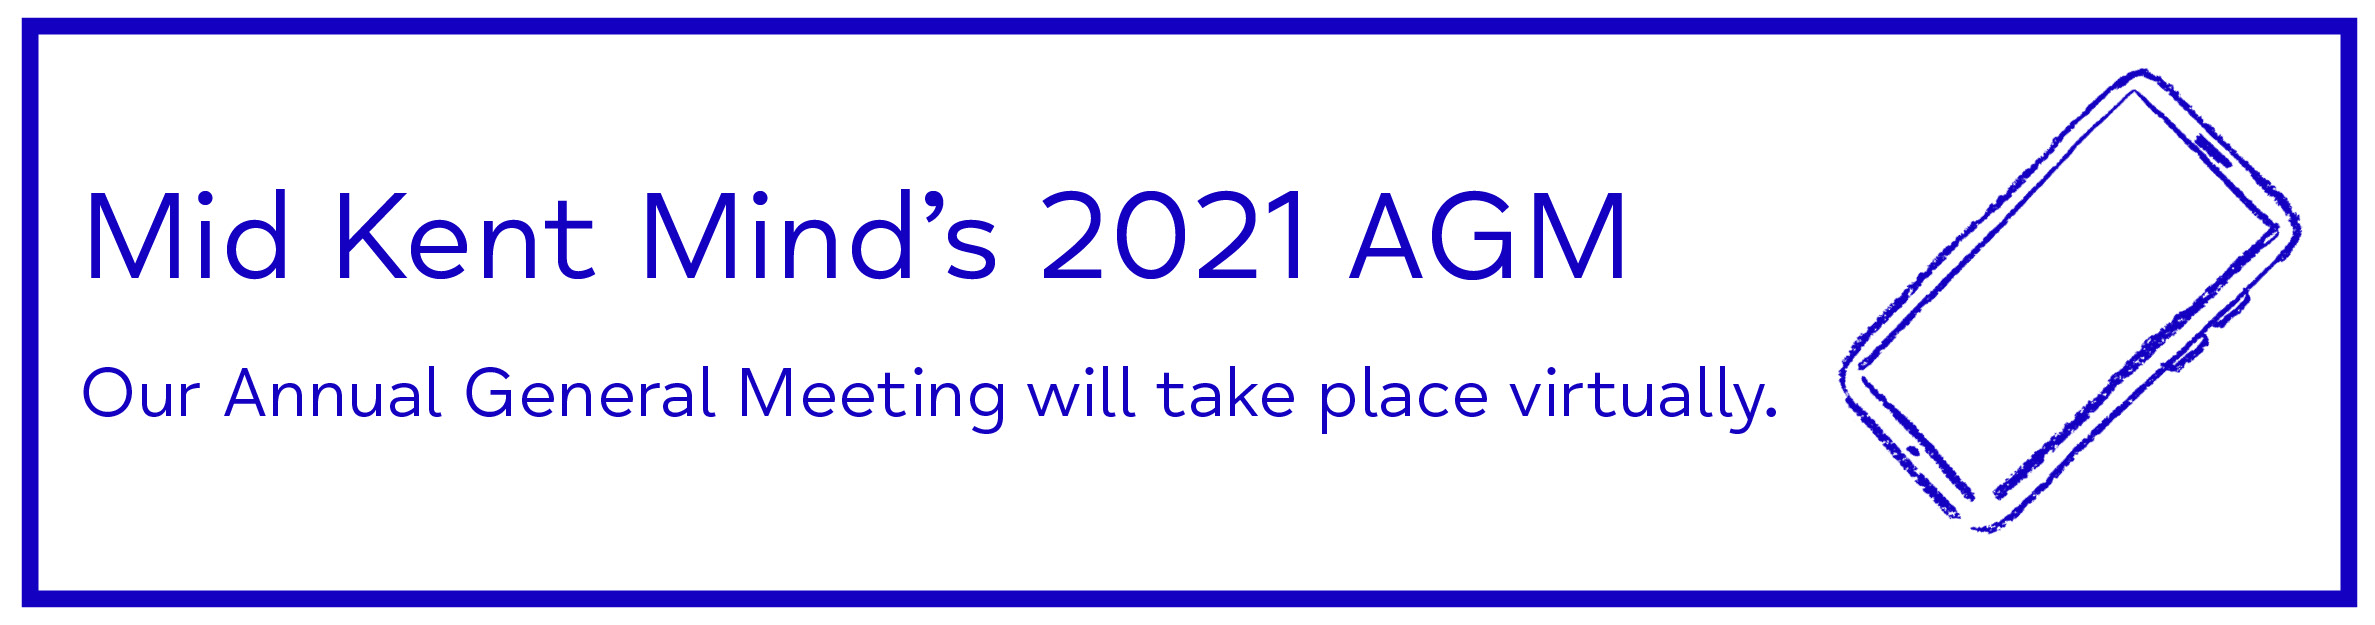 Mid Kent Mind’s 2021 AGM Our Annual General Meeting will take place virtually. - Mid Kent Mind